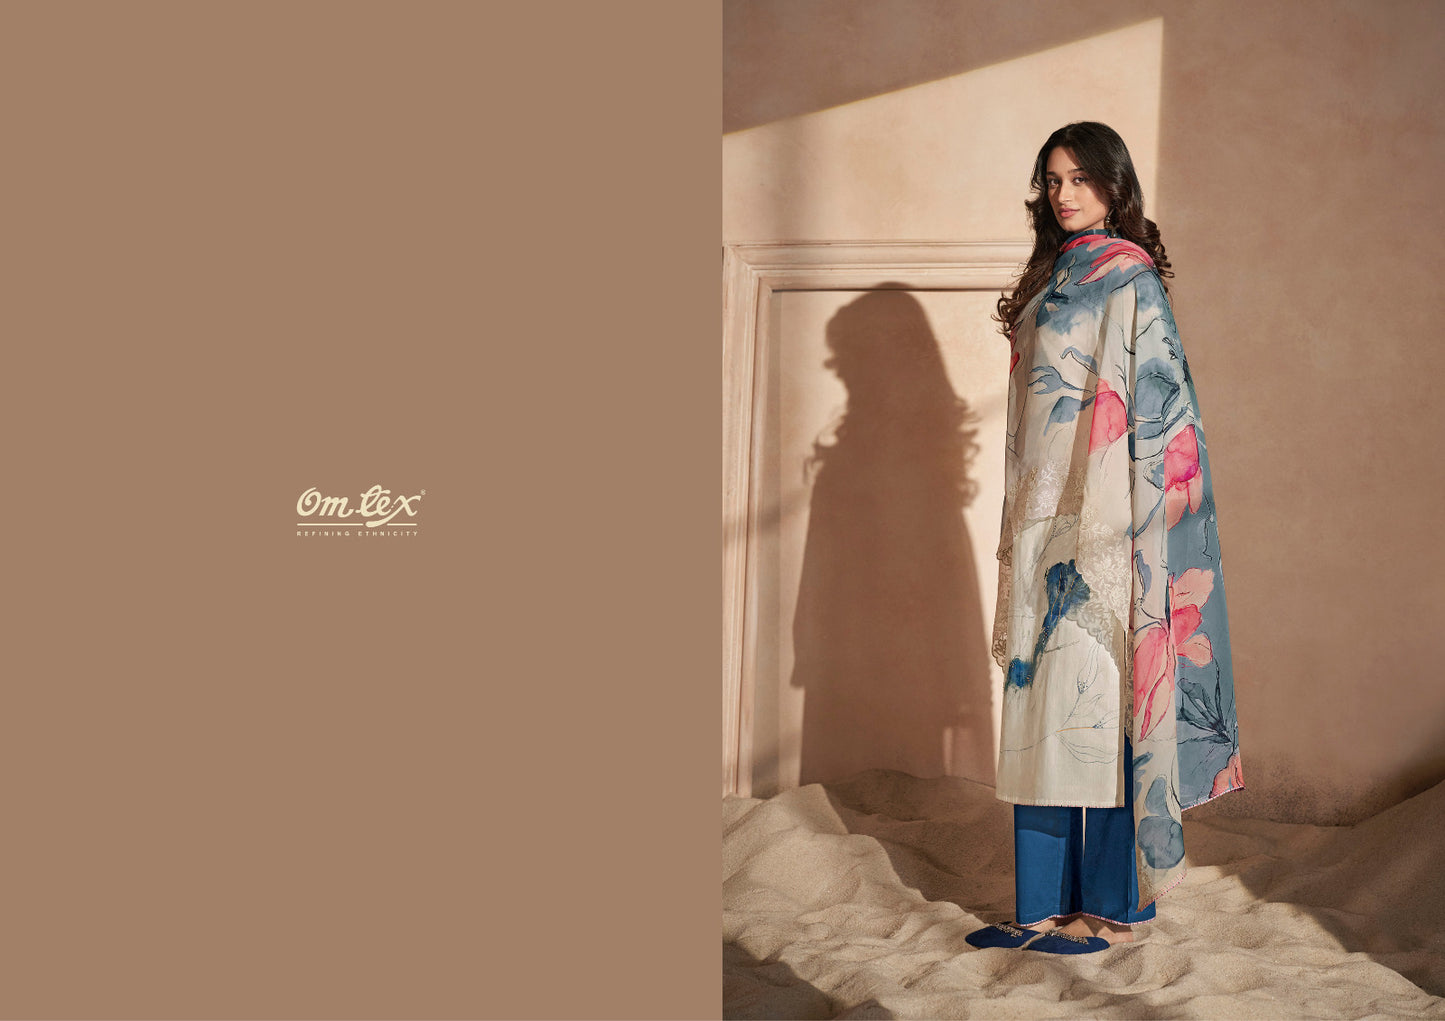 Praniti Omtex Lawn Cotton Pant Style Suits